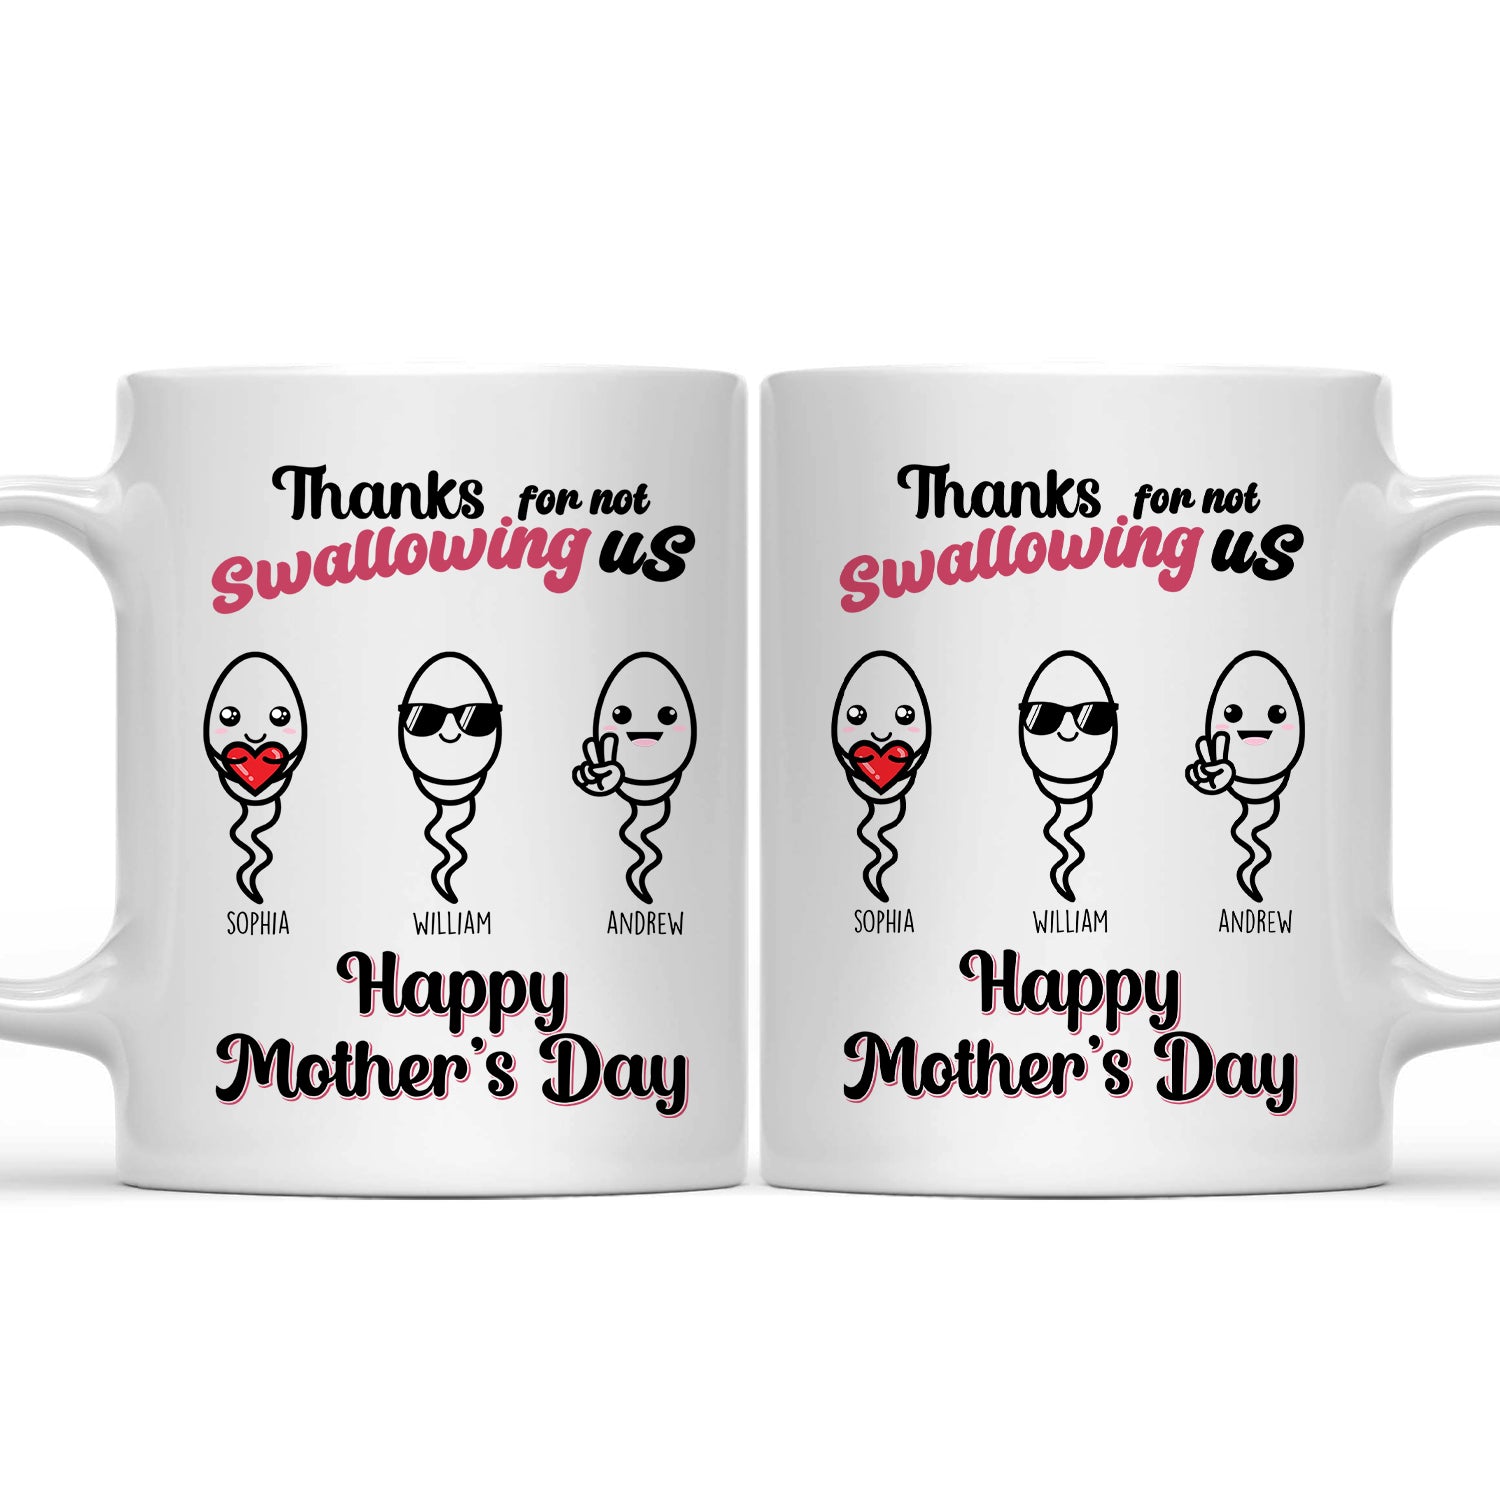 Thanks For Not Swallowing Us - Funny Gift For Mom, Mother, Grandma - Personalized Mug